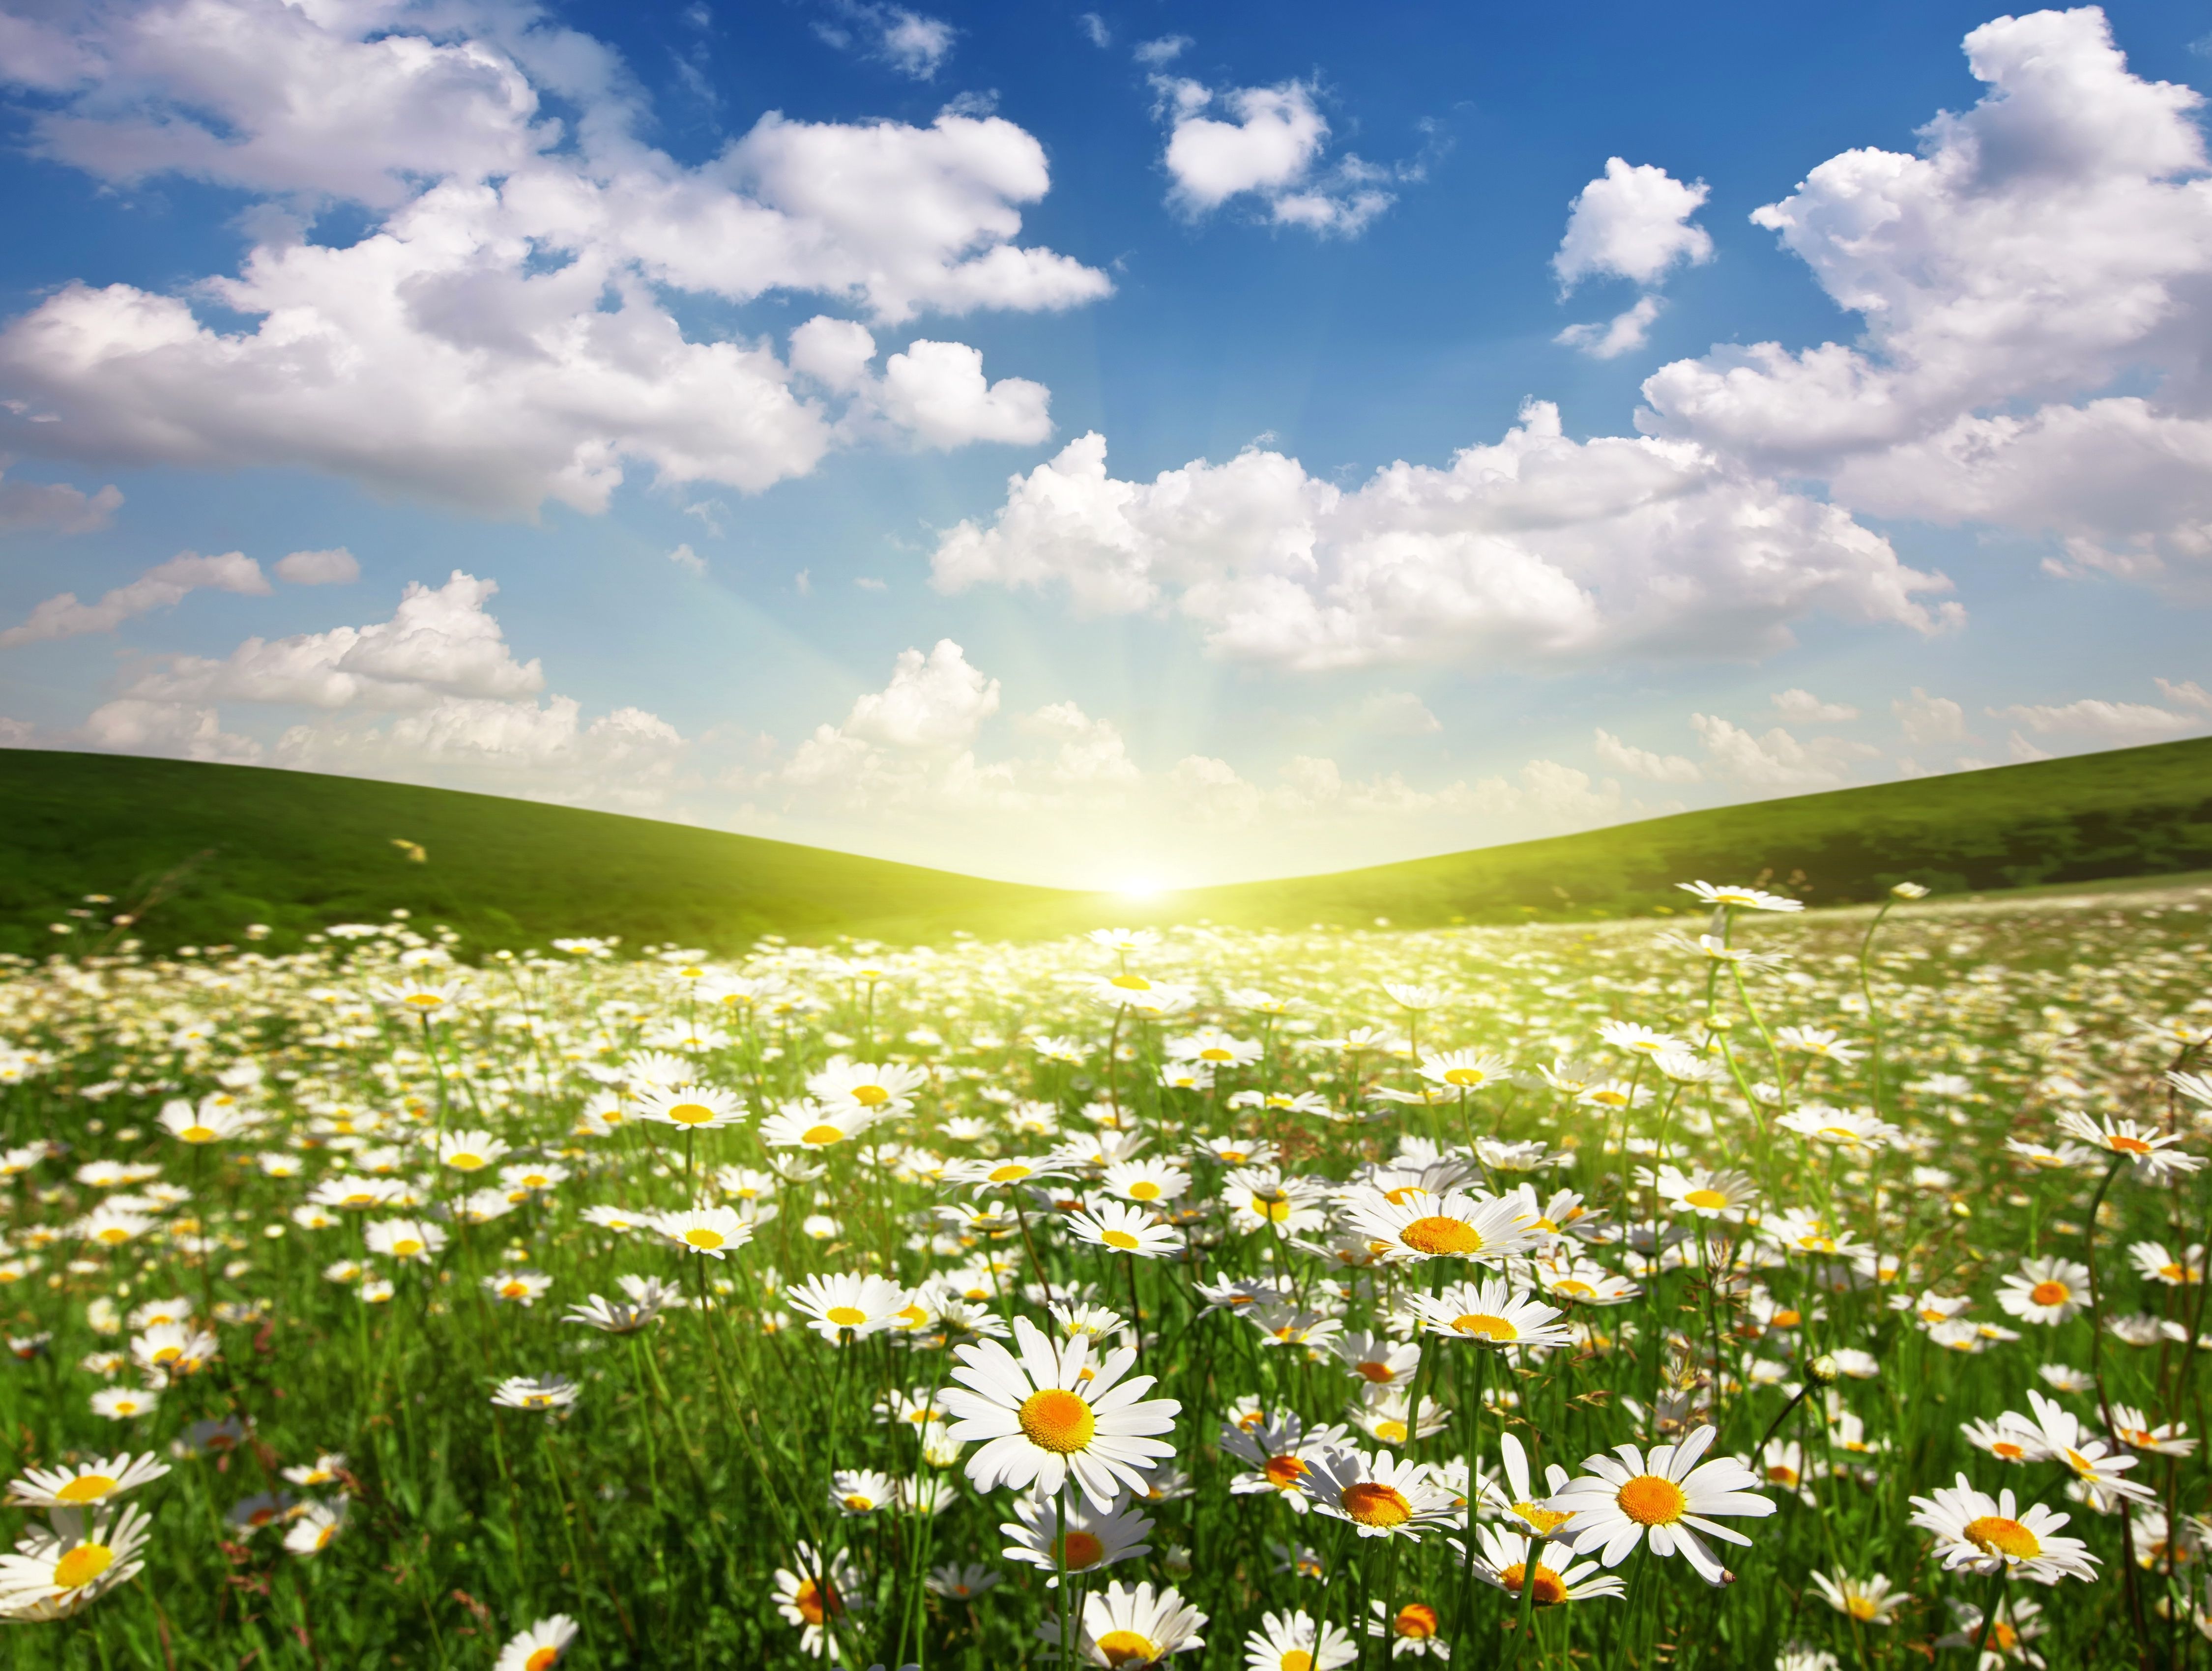 Sunrise over Field of Daisies 4k Ultra HD Wallpaper. Background